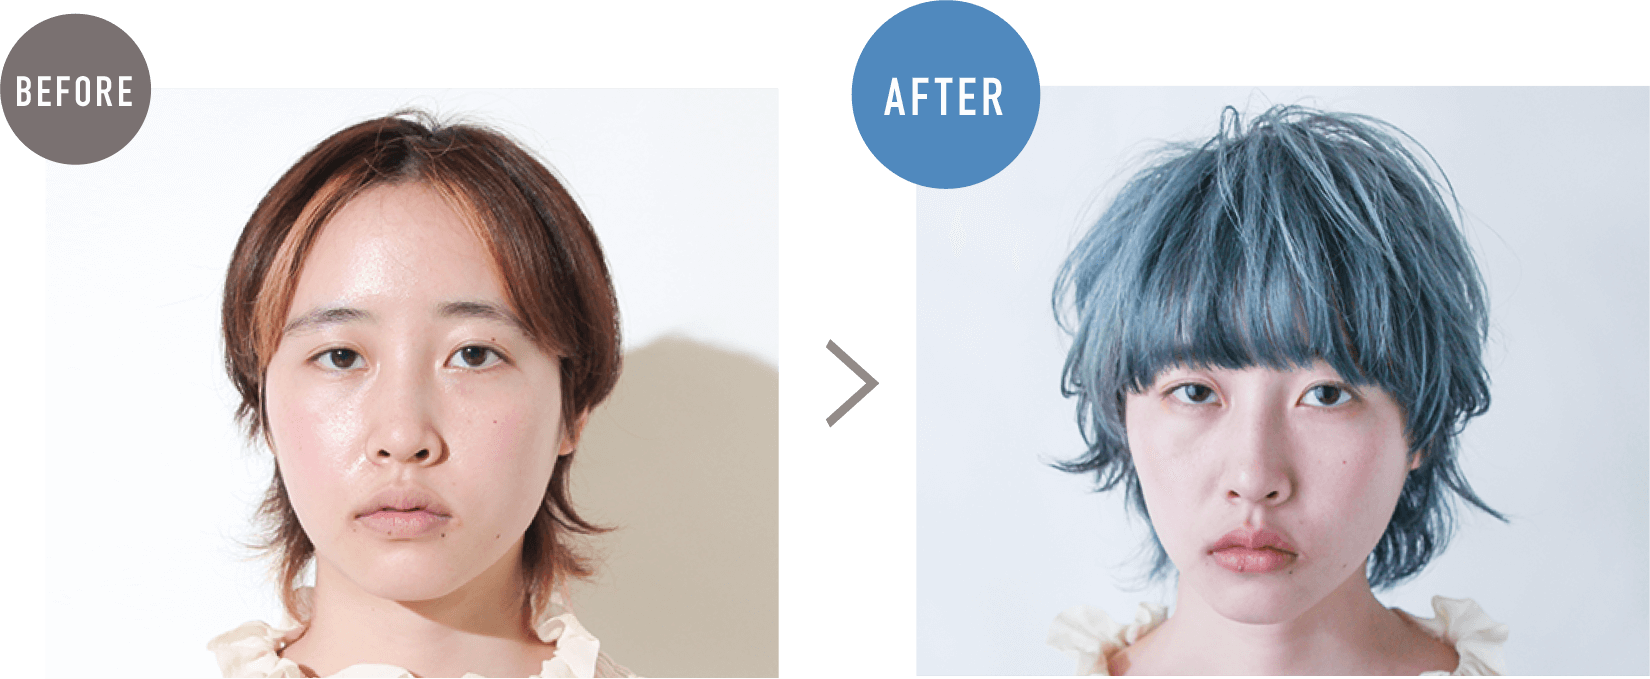 BEFORE > AFTER